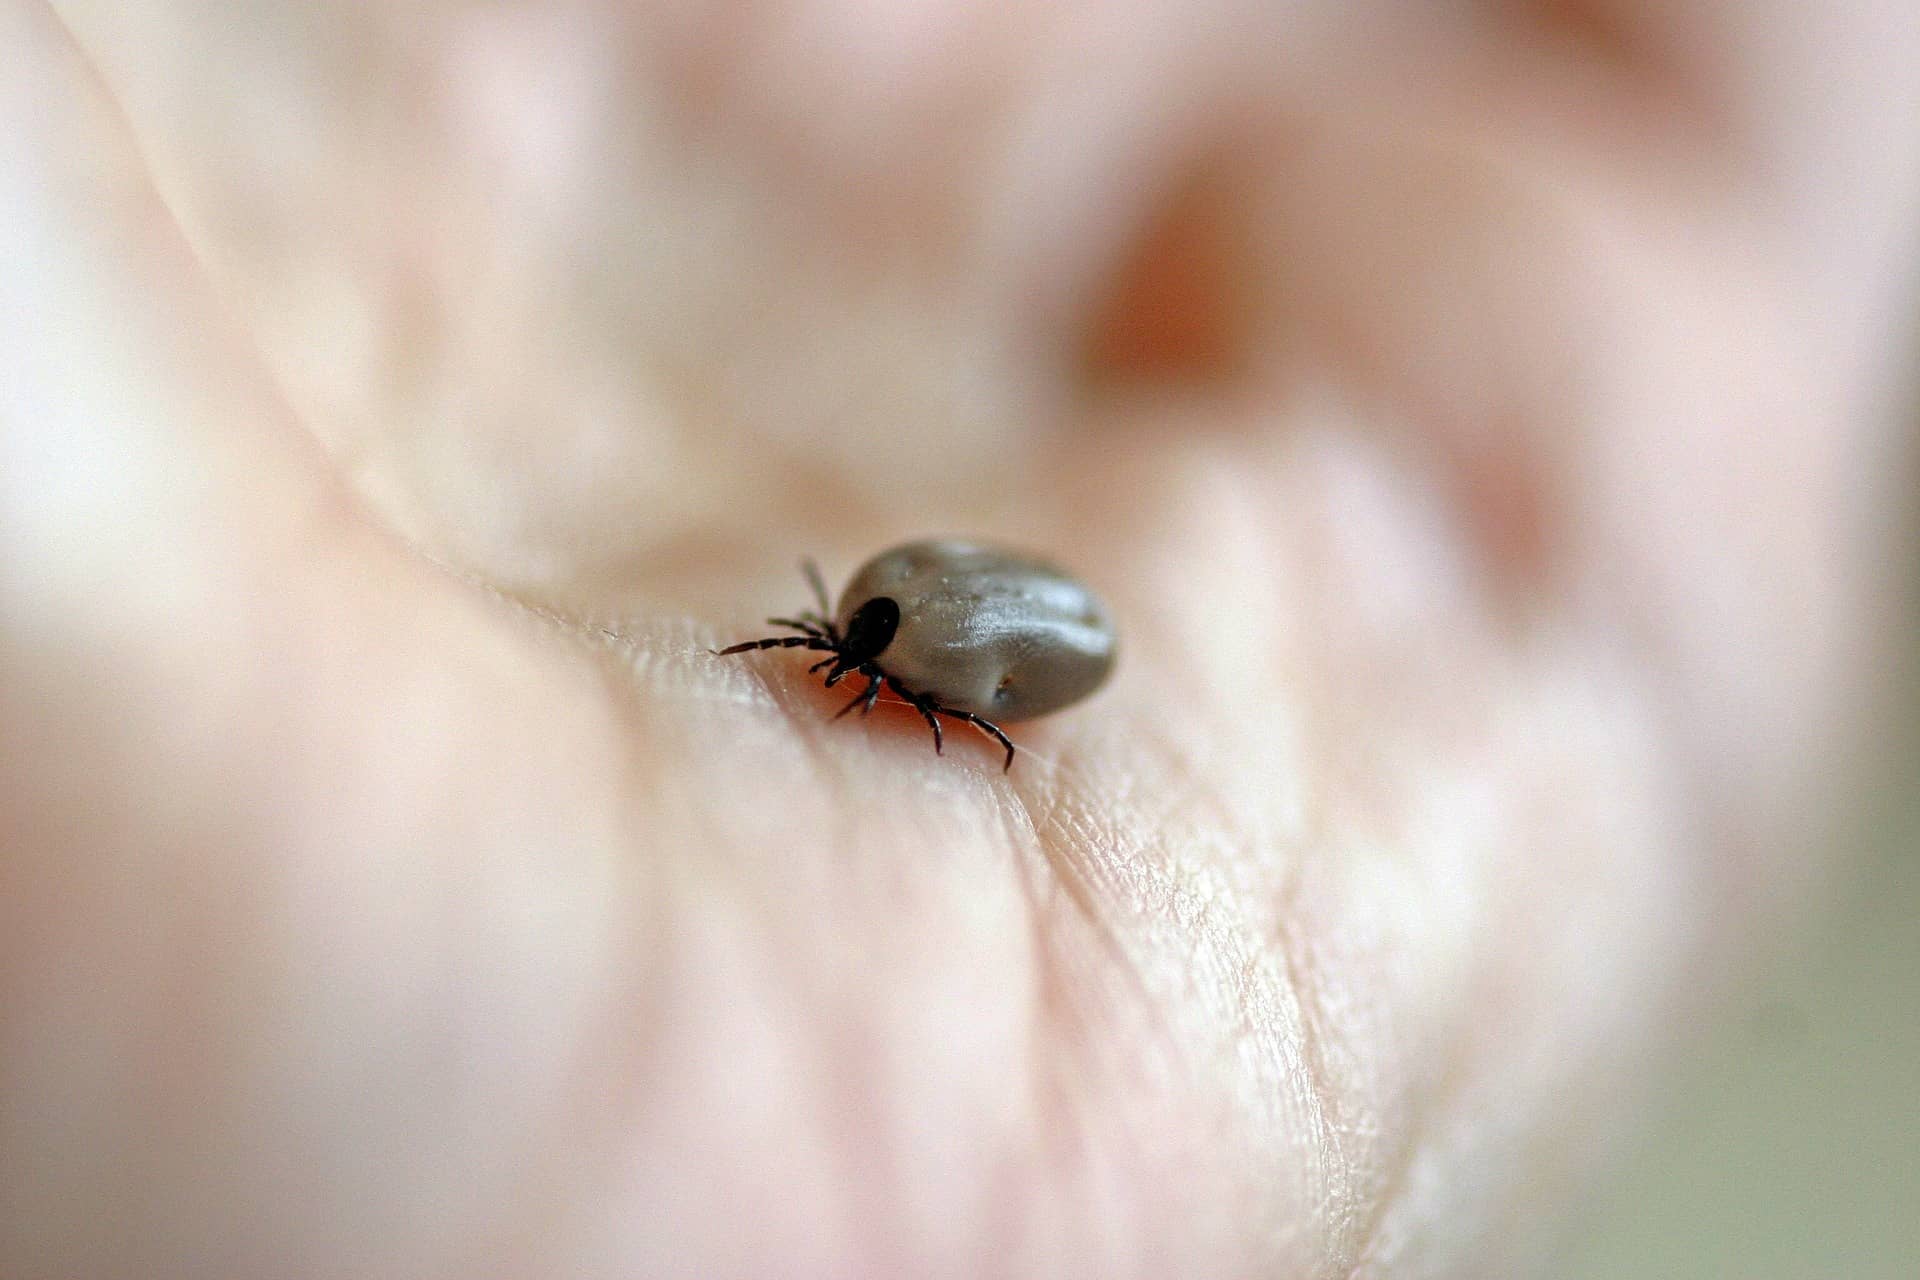 fully fed tick found on a man in maryland